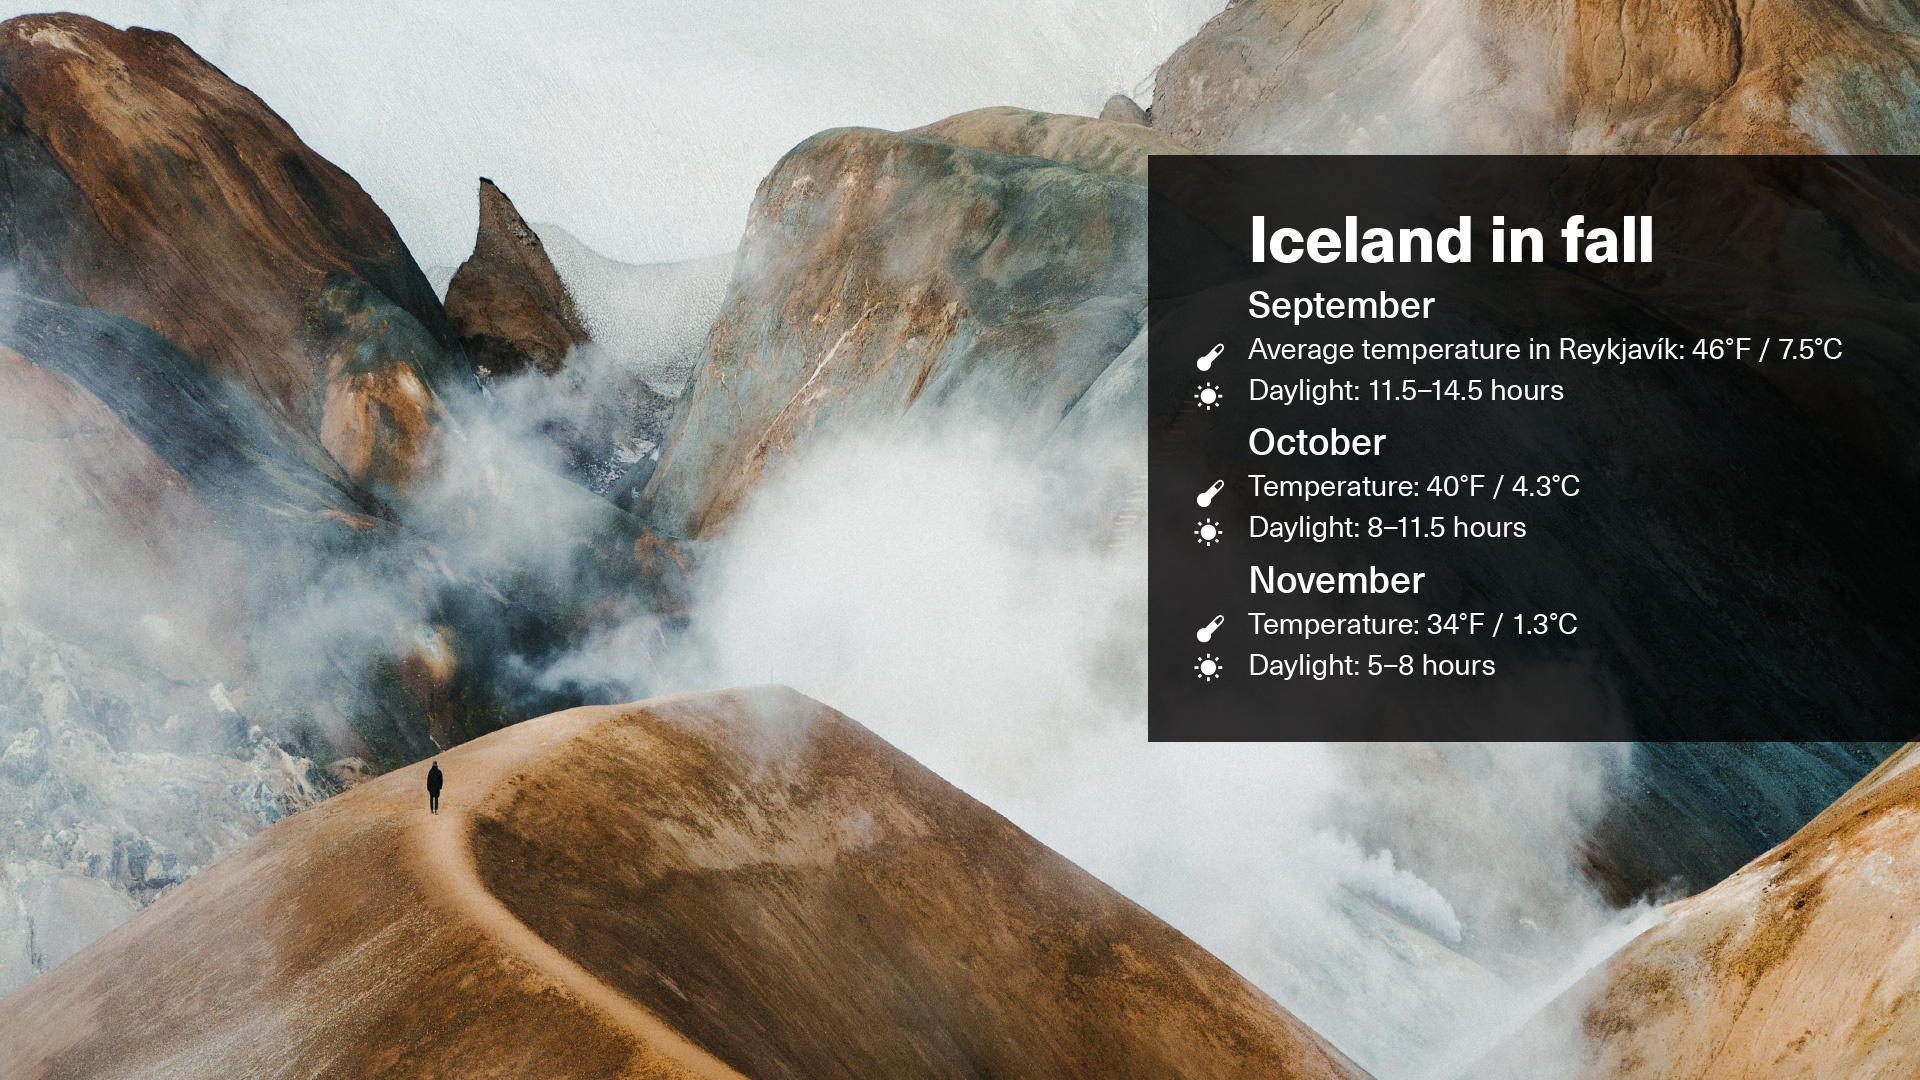 Autumn weather displayed via an illustrative graphic with Highlands landscape pictured in the background and text overleaf that displays the weather and daylight hours in September, October and November in Iceland